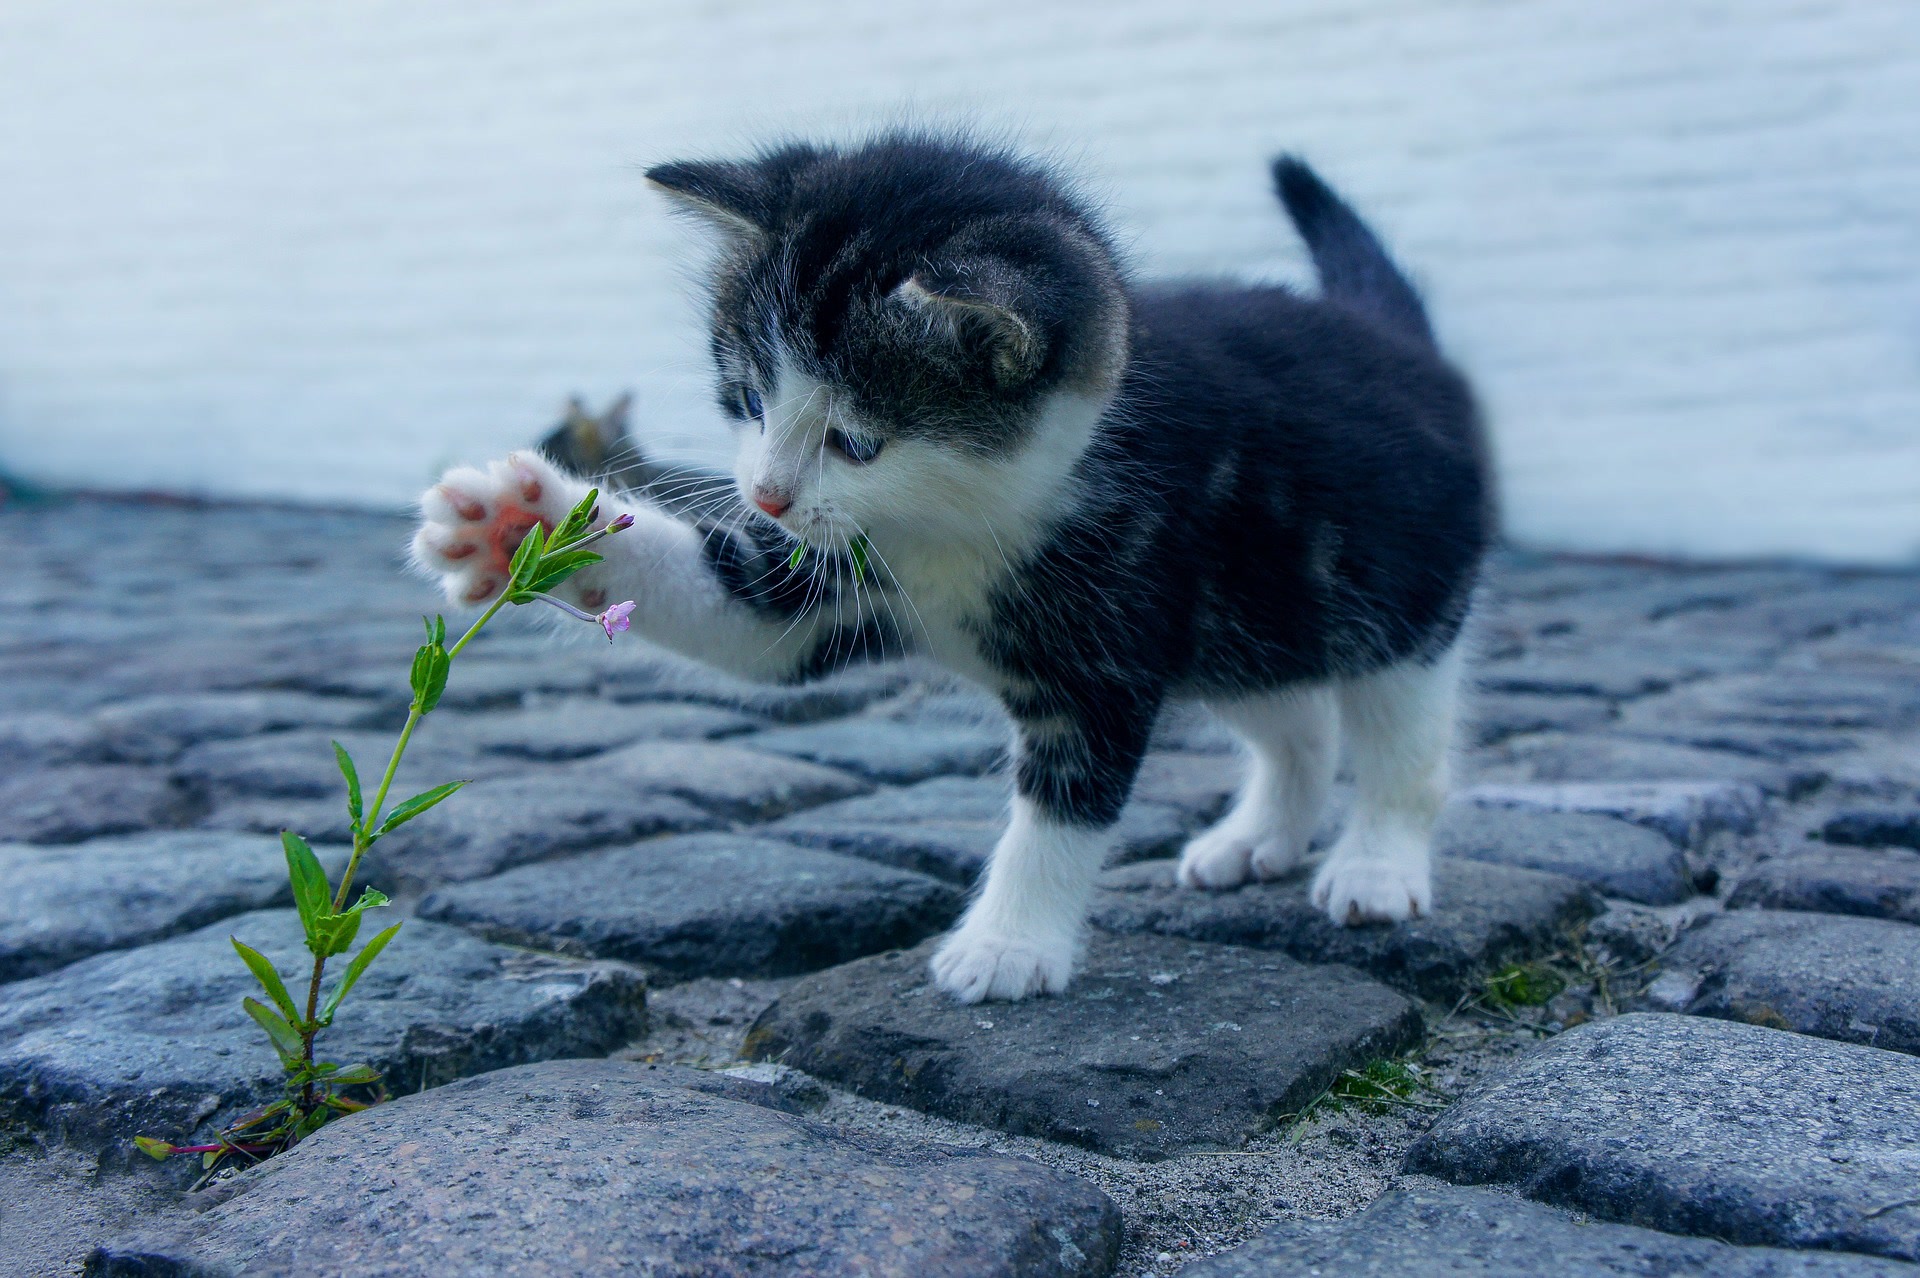 A black and white kitten pets a flower growing out of the cobble stones.